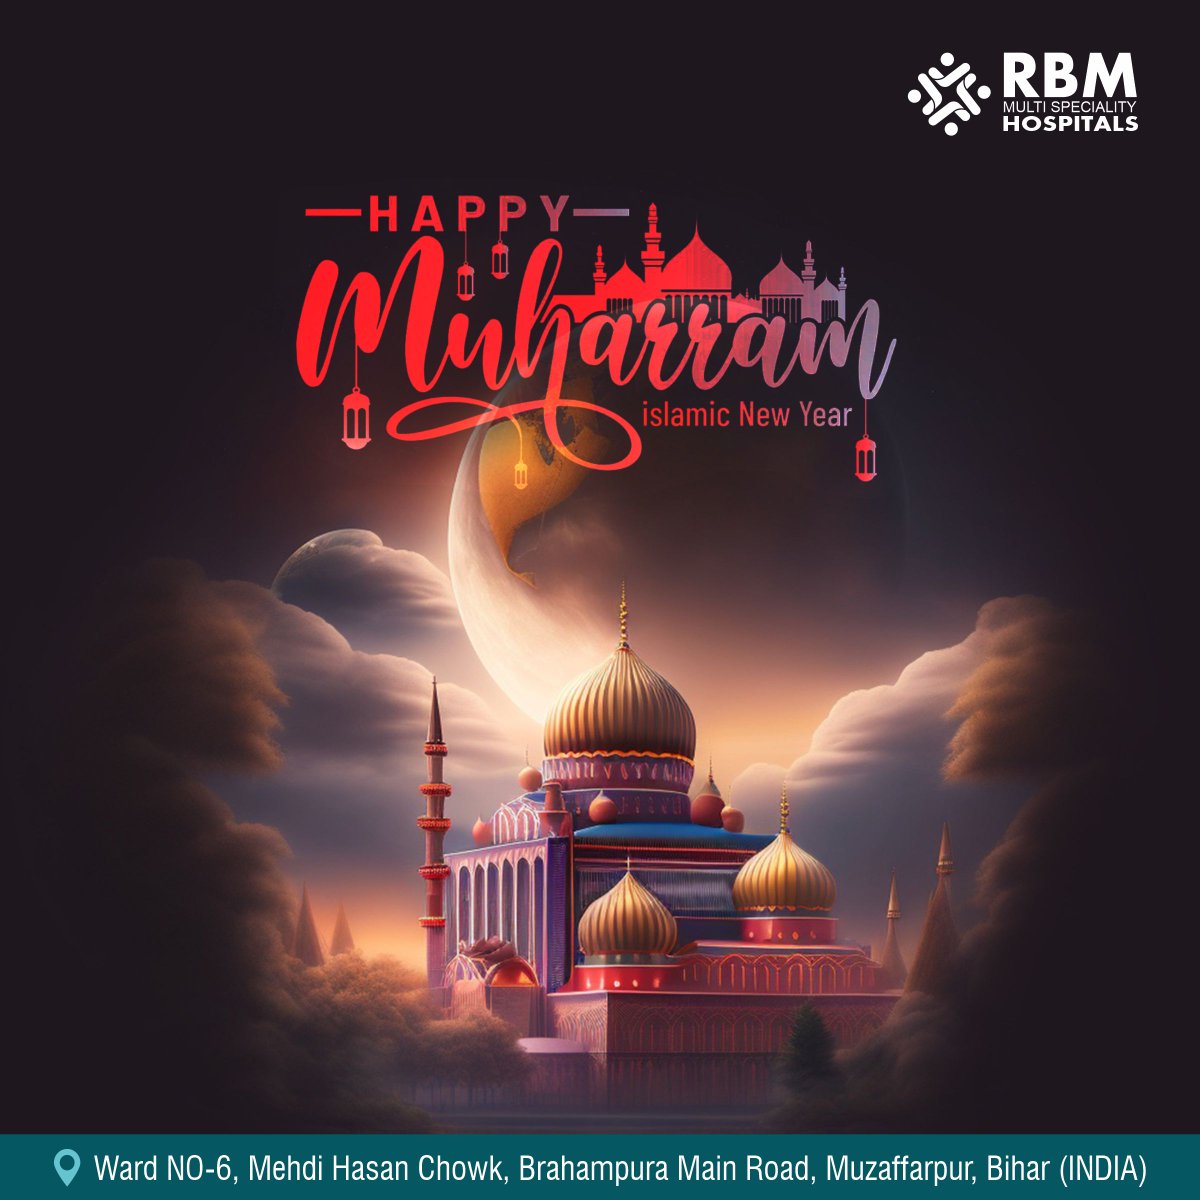 As the Islamic New Year begins with the sacred month of Muharram, we take a moment to reflect on the significance of this time and its importance in the Islamic calendar. 

#rbmhospital #bihar #muzaffarpur #Muharram #IslamicNewYear #ReflectionAndRenewal